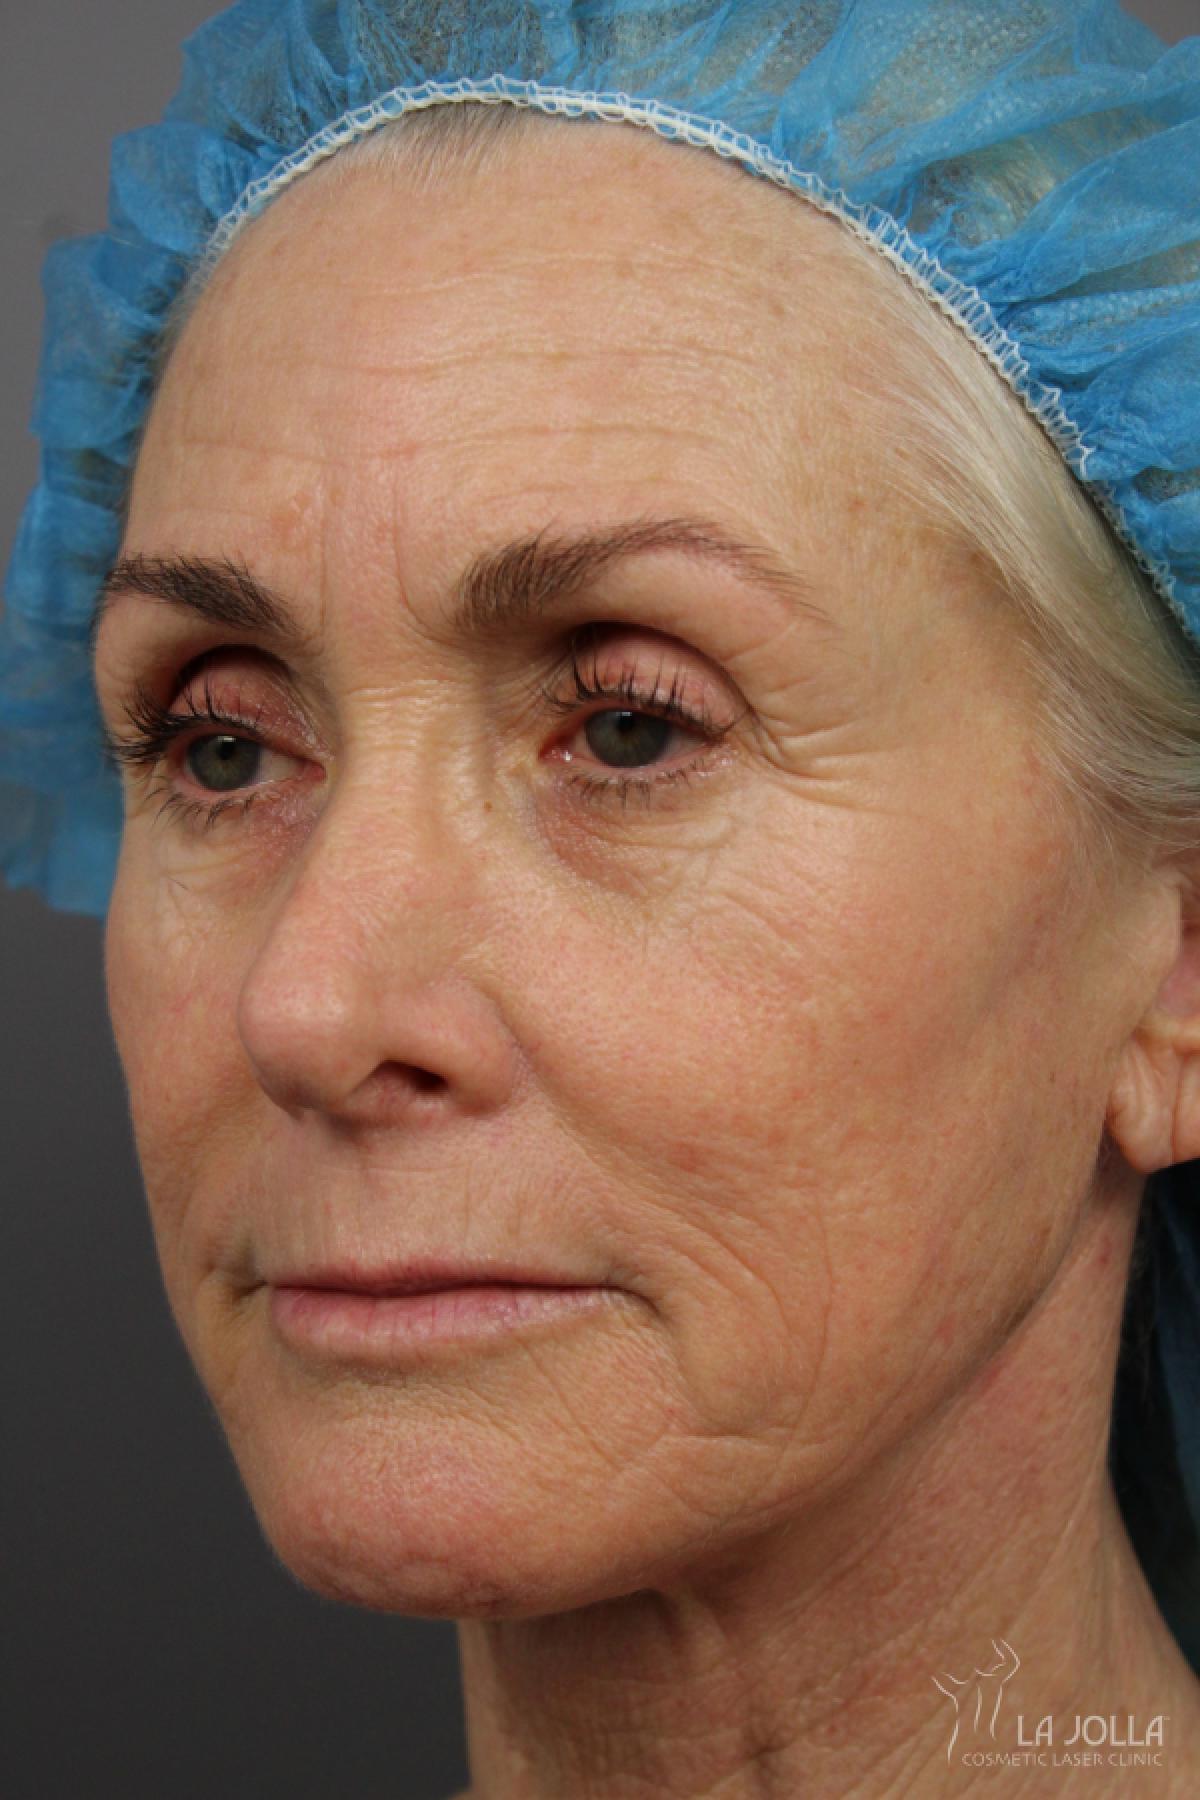 Laser Skin Resurfacing: Patient 1 - Before and After 3